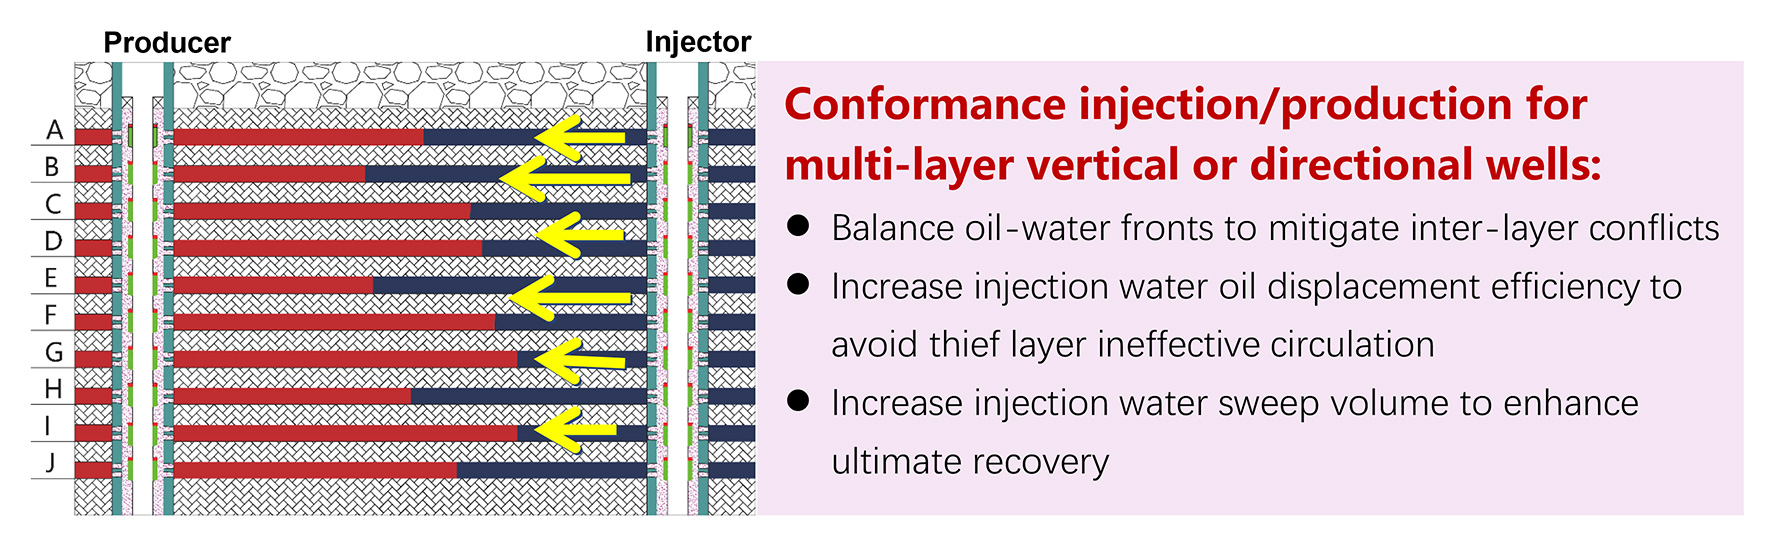 Multi-layer conformance injection and production(图1)